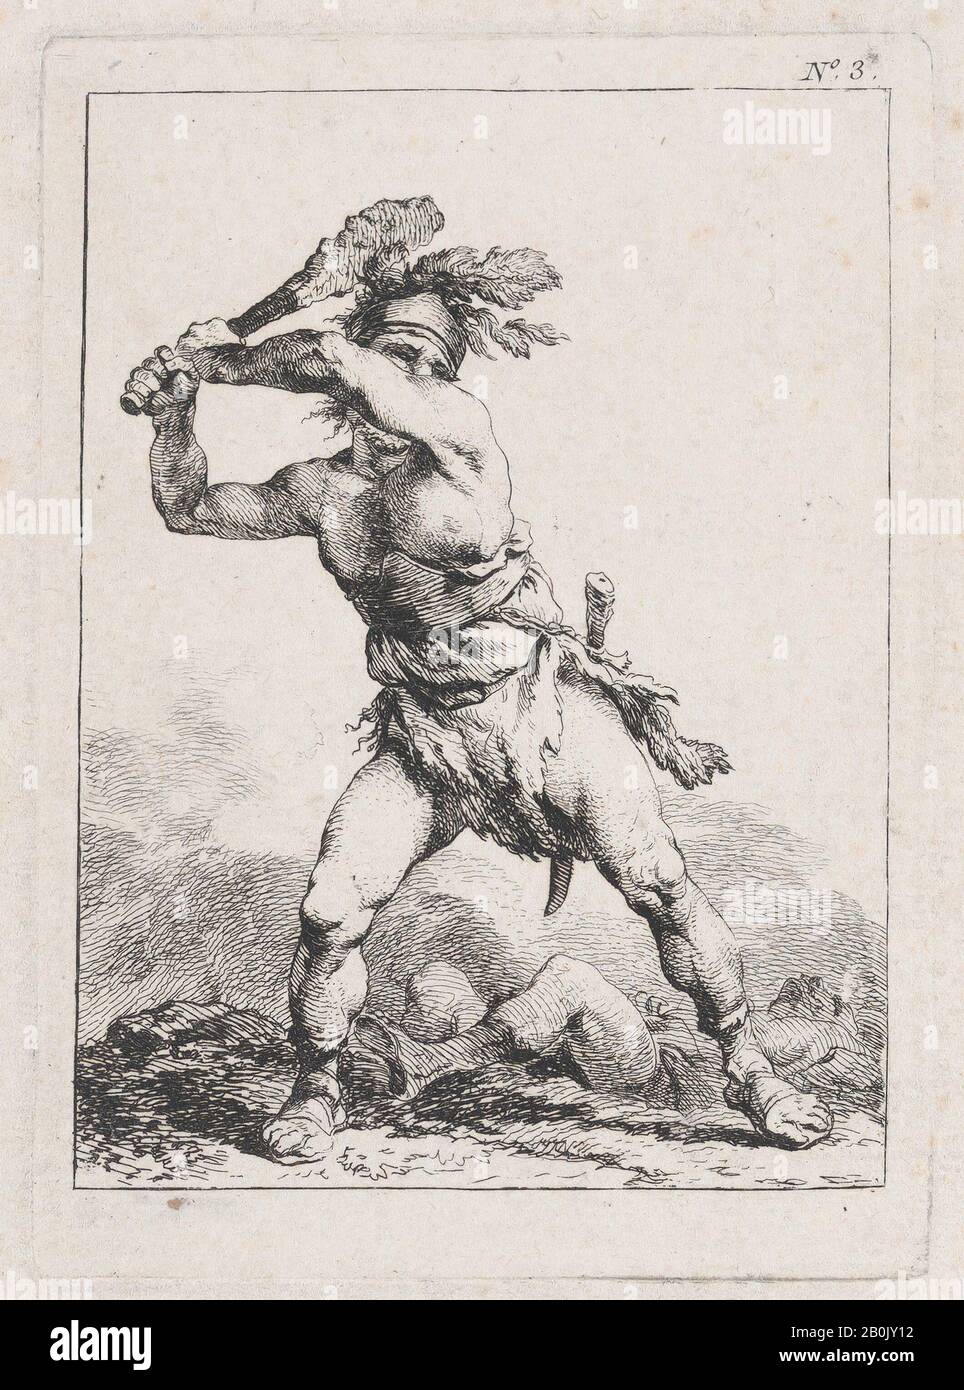 Philippe Jacques De Loutherbourg, Savage Solider Swinging A Club, First Suite Of Soldiers, P. 3, Philippe Jacques De Loutherbourg (Francese, Strasburgo 1740–1812 Londra), 1755–71, Acquaforte, Immagine: 4 3/16 × 3 1/8 In. (10,7 × 7,9 cm), Piastra: 4 13/16 × 3 7/16 in. (12,2 × 8,8 cm), foglio: 5 13/16 × 3 3/4 in. (14,8 × 9,5 cm), stampe Foto Stock